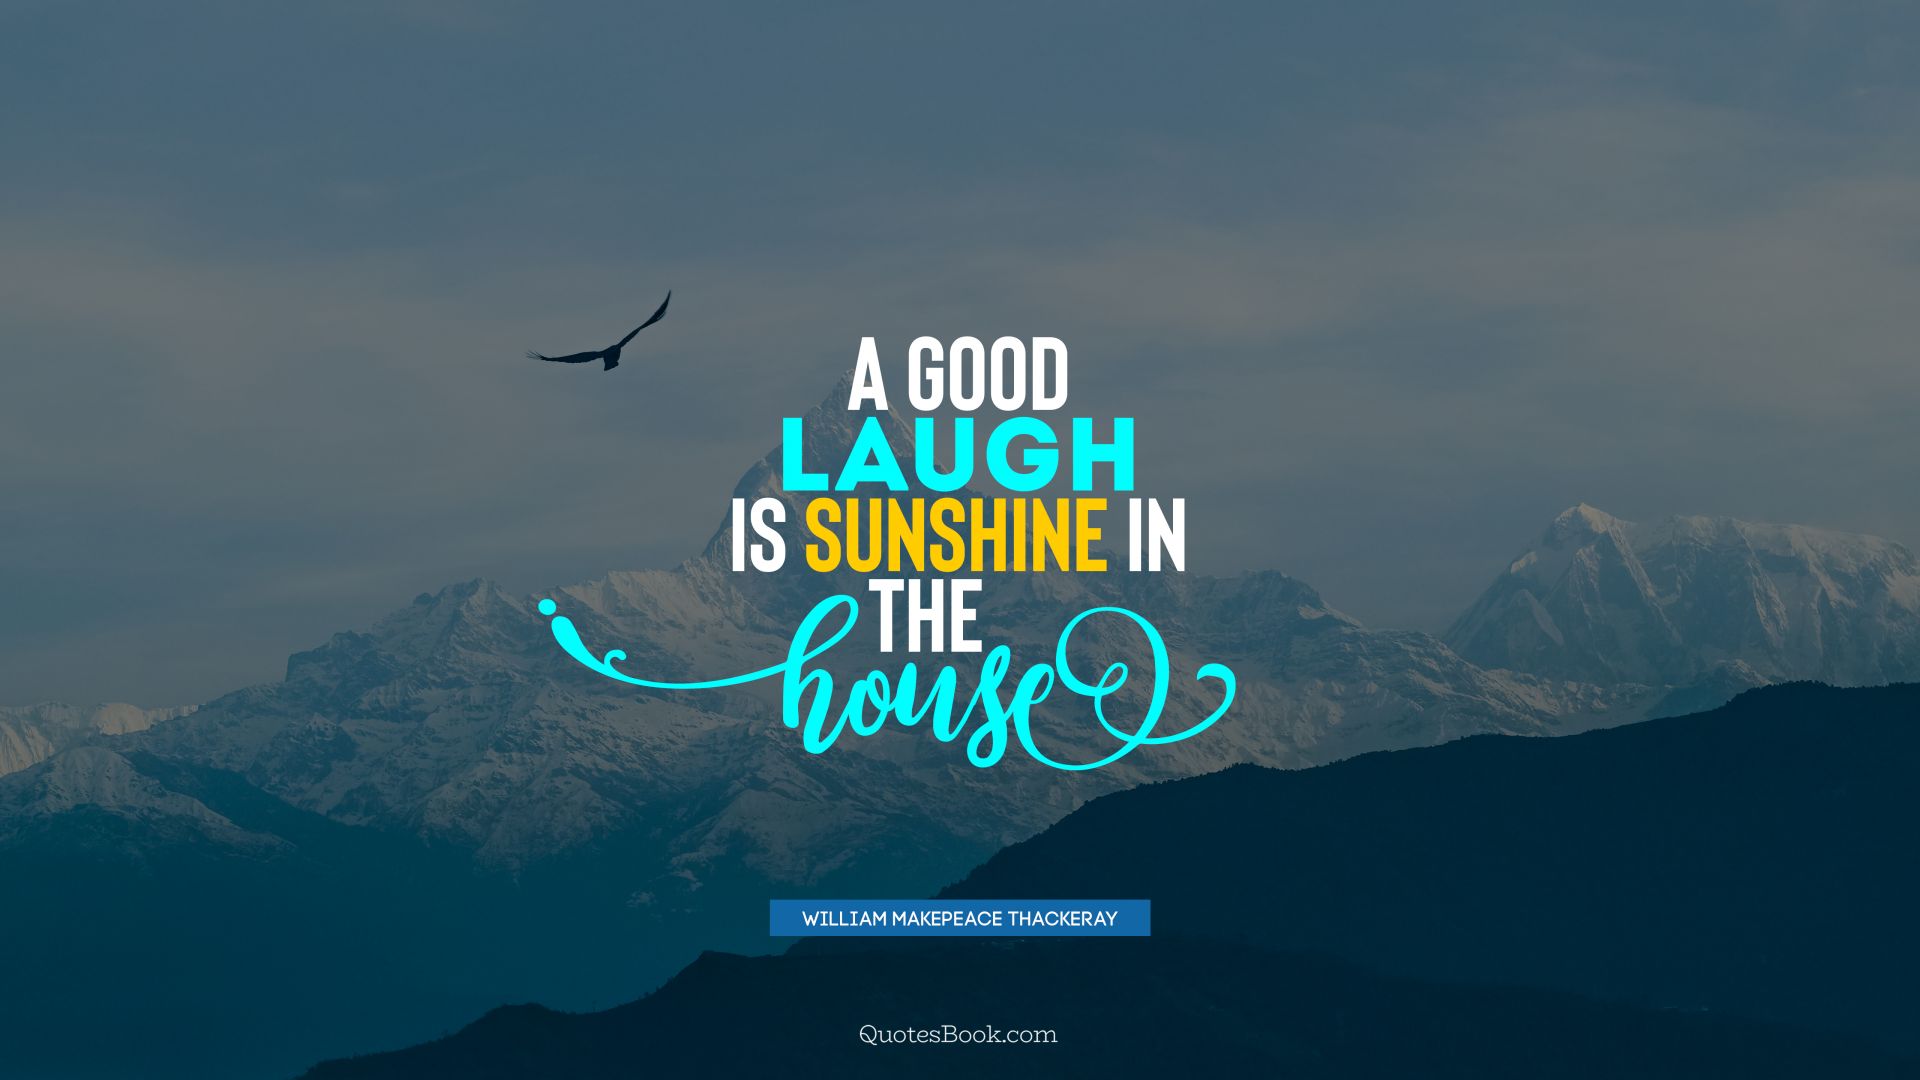 A good laugh is sunshine in the house. - Quote by William Makepeace Thackeray